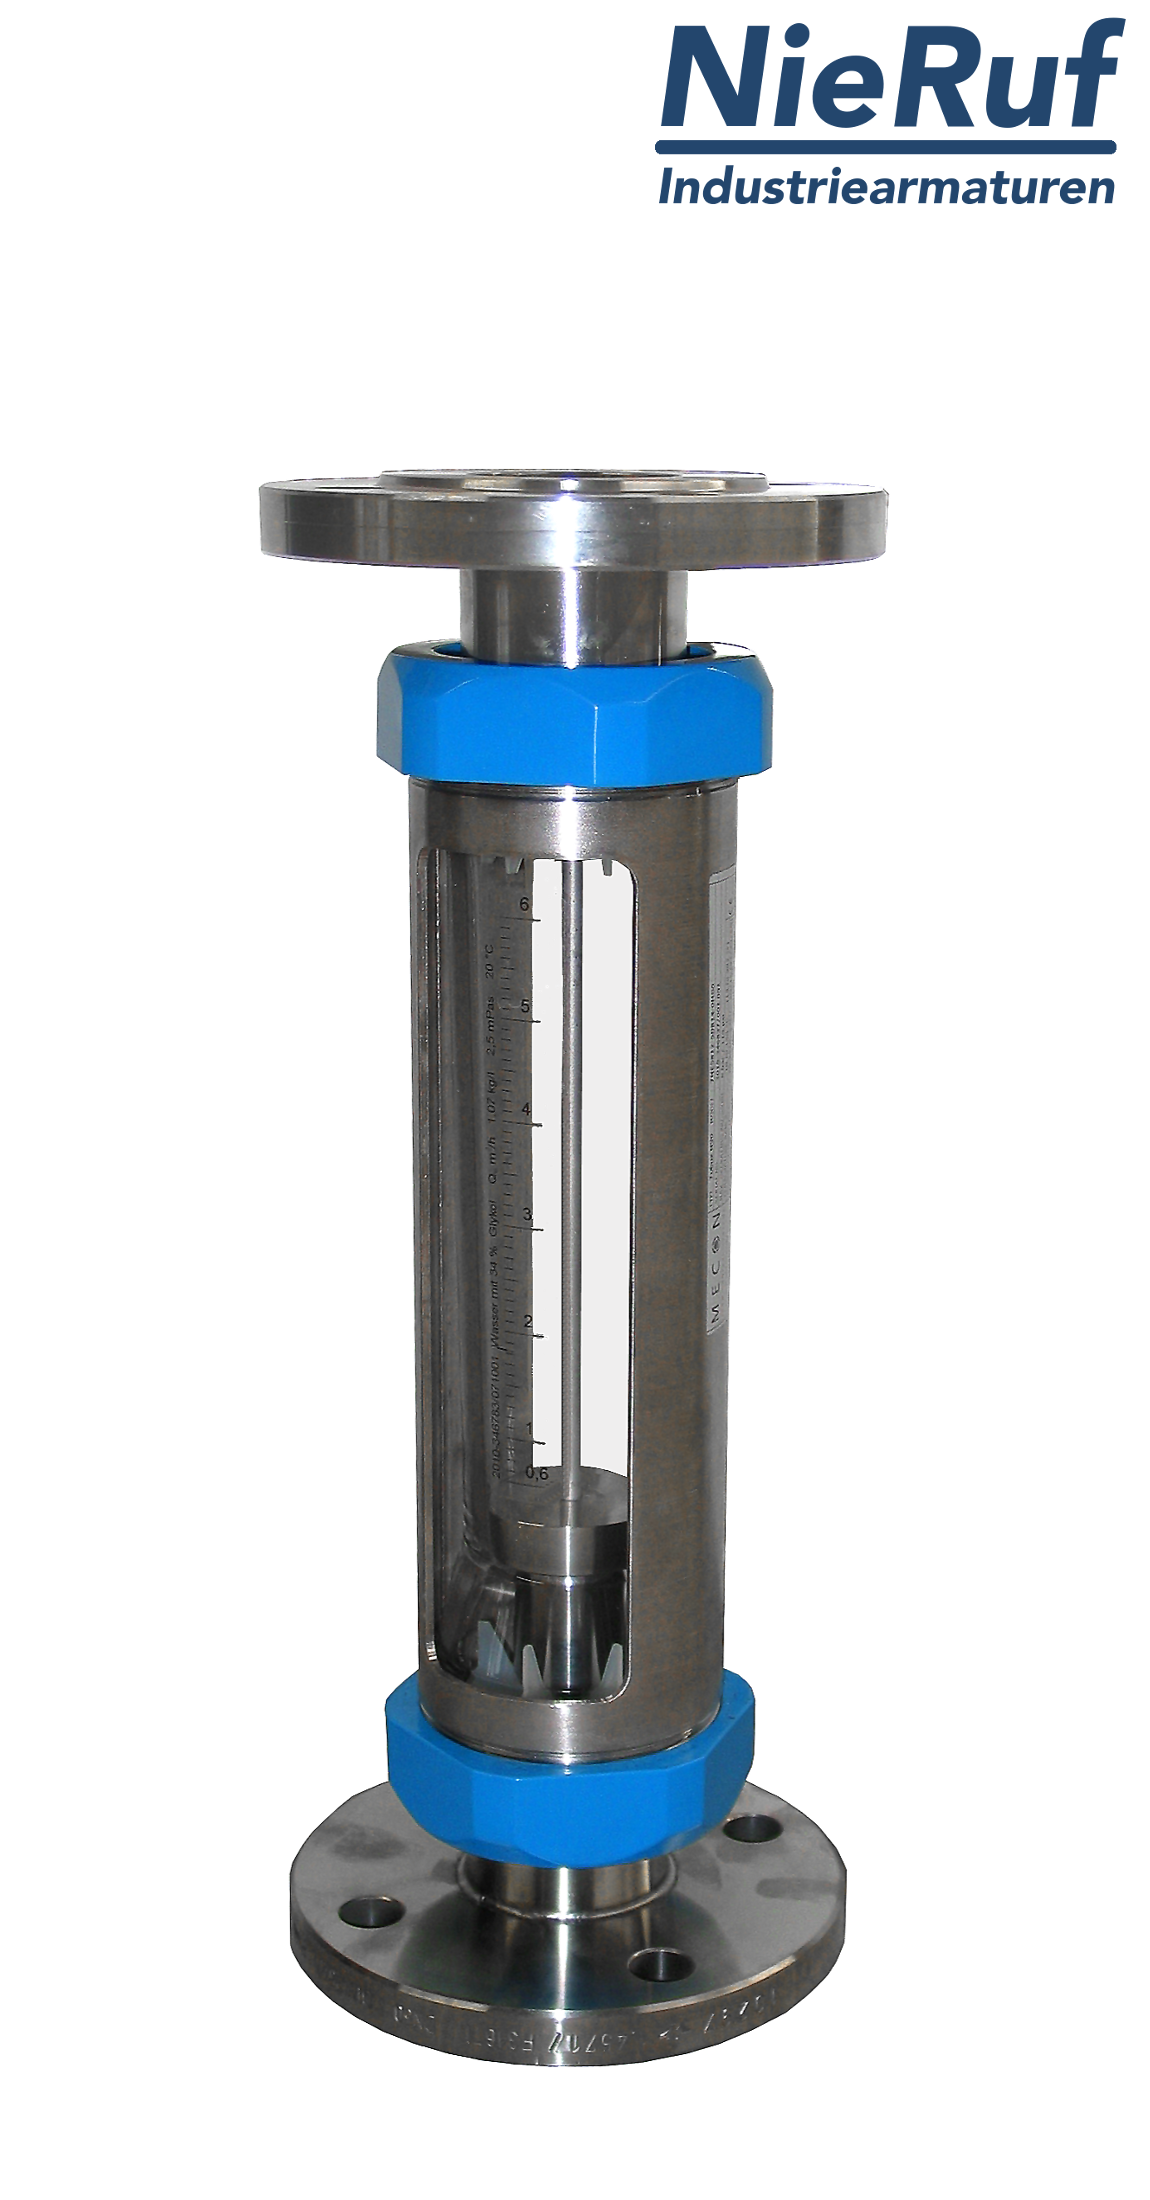 Variable area flowmeter stainless steel + borosilicate flange DN15 16.0 - 160 l/h water FKM